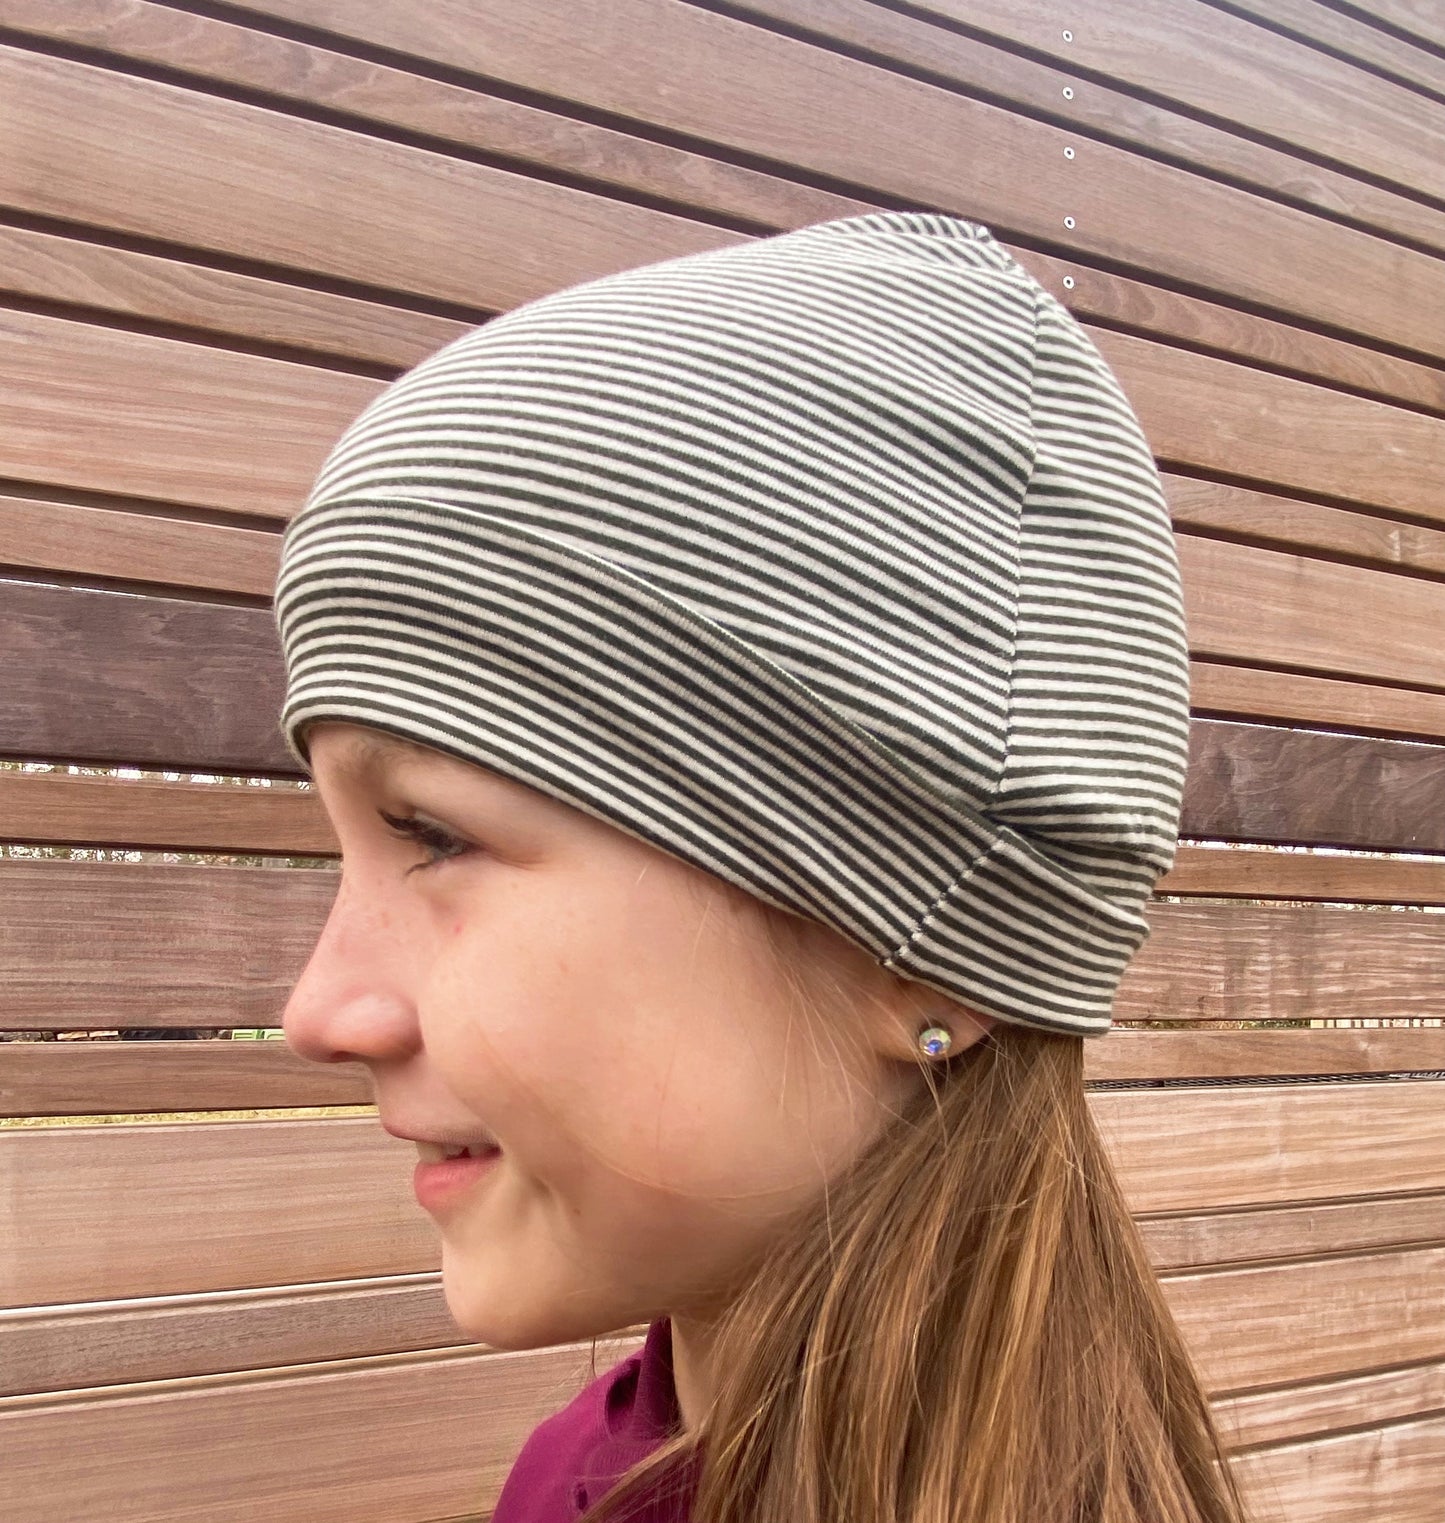 Beanie Hat in Baby: Polka Dots with Leaves